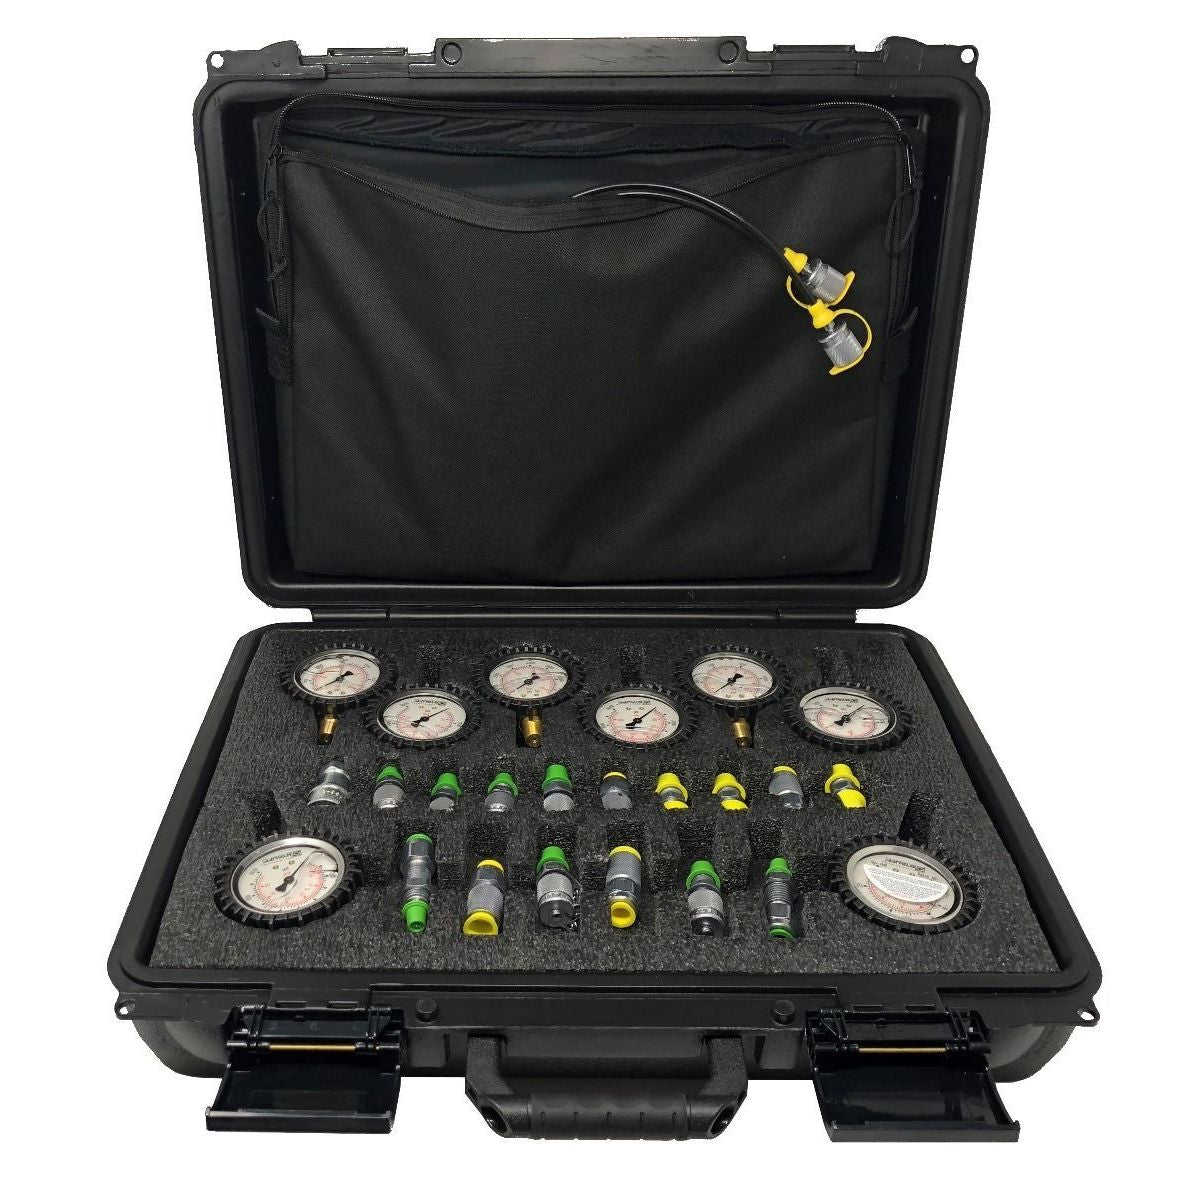 SMB-20-E1-8 : Stauff Complete 8-Gauge Test Kit with Carrying Case